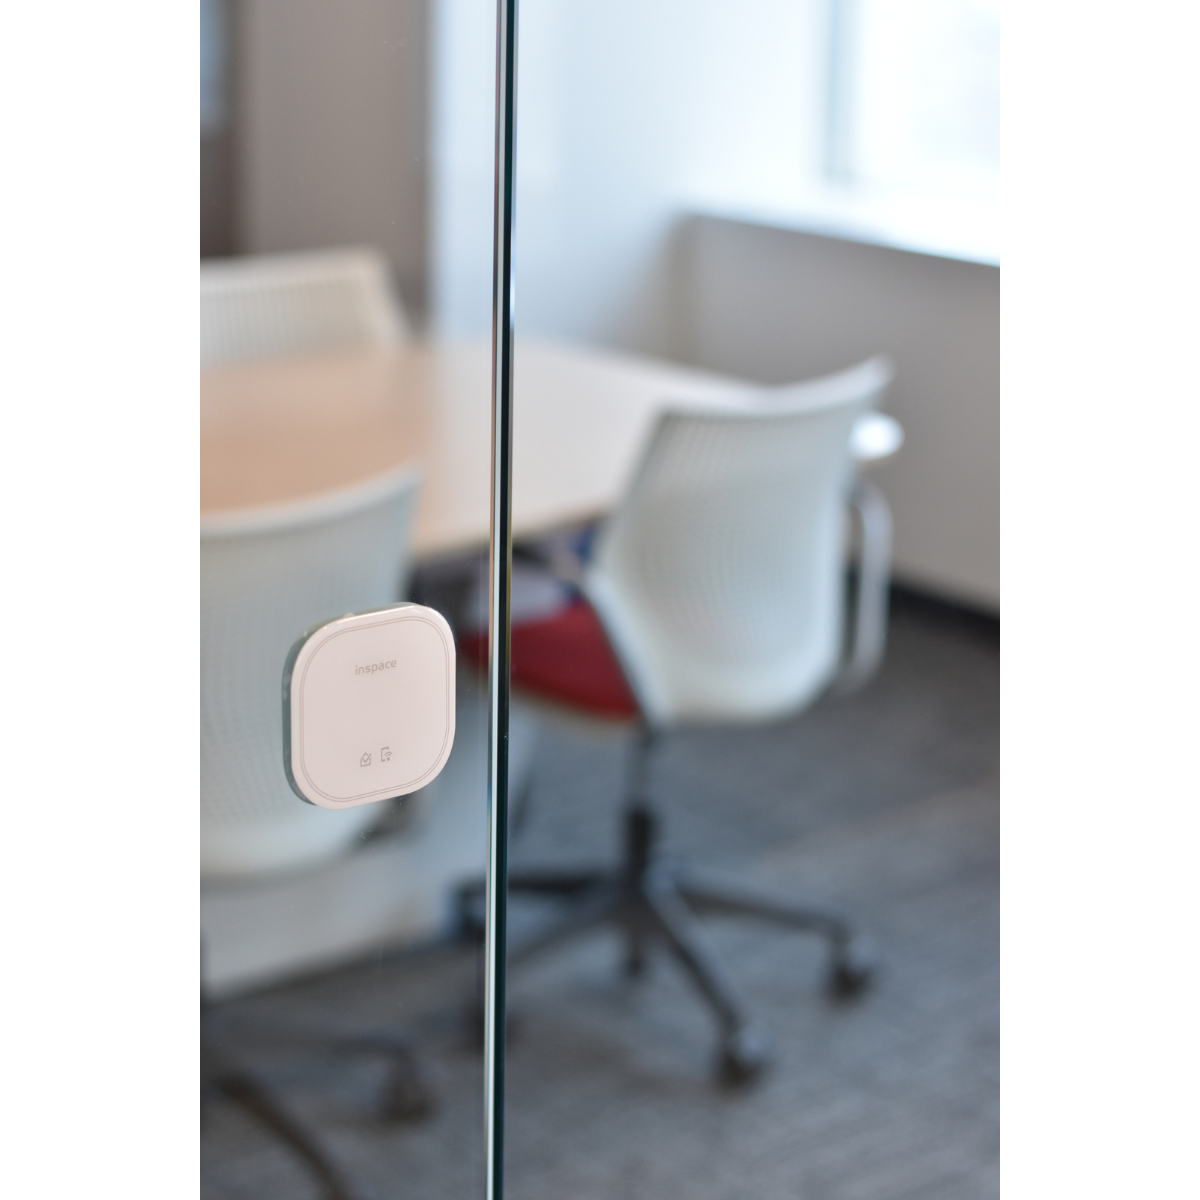 inspace room check in devices are a secure and accurate way of measuring space usage. With check in selected, meeting rooms are automatically released if no one checks in.